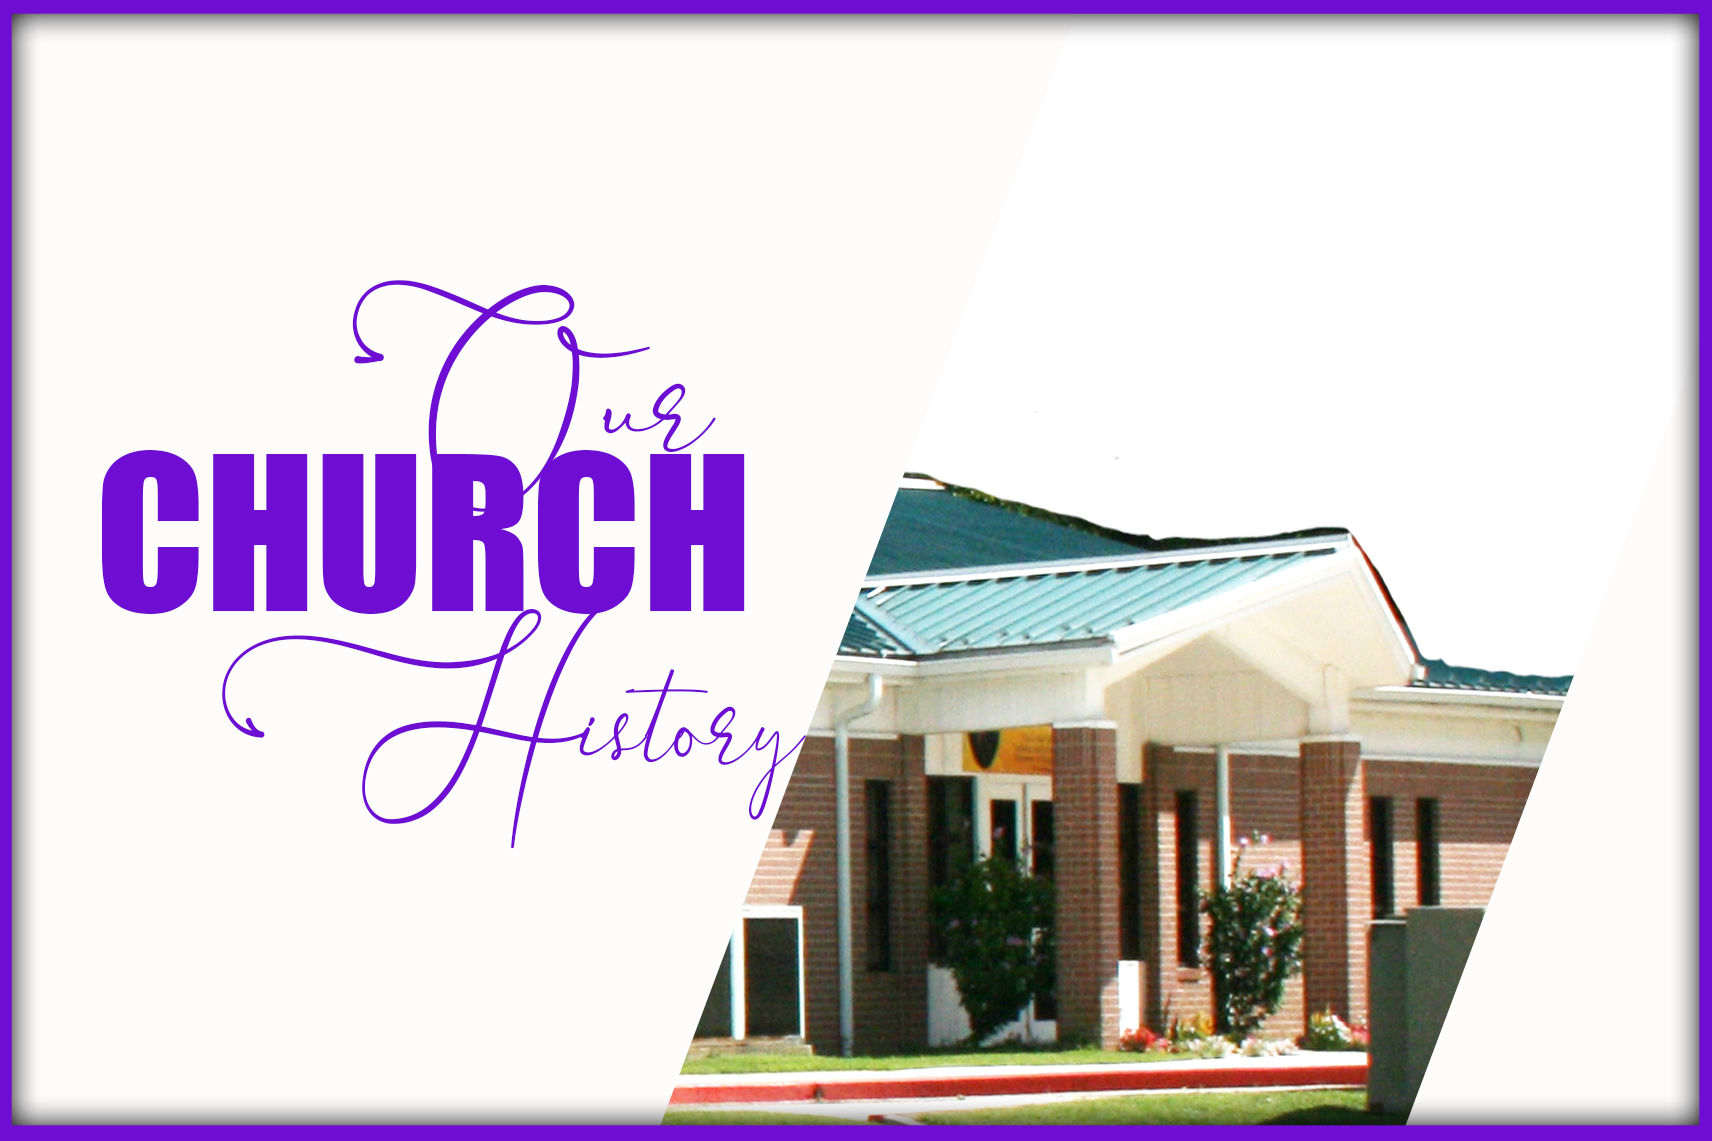 Our Church History